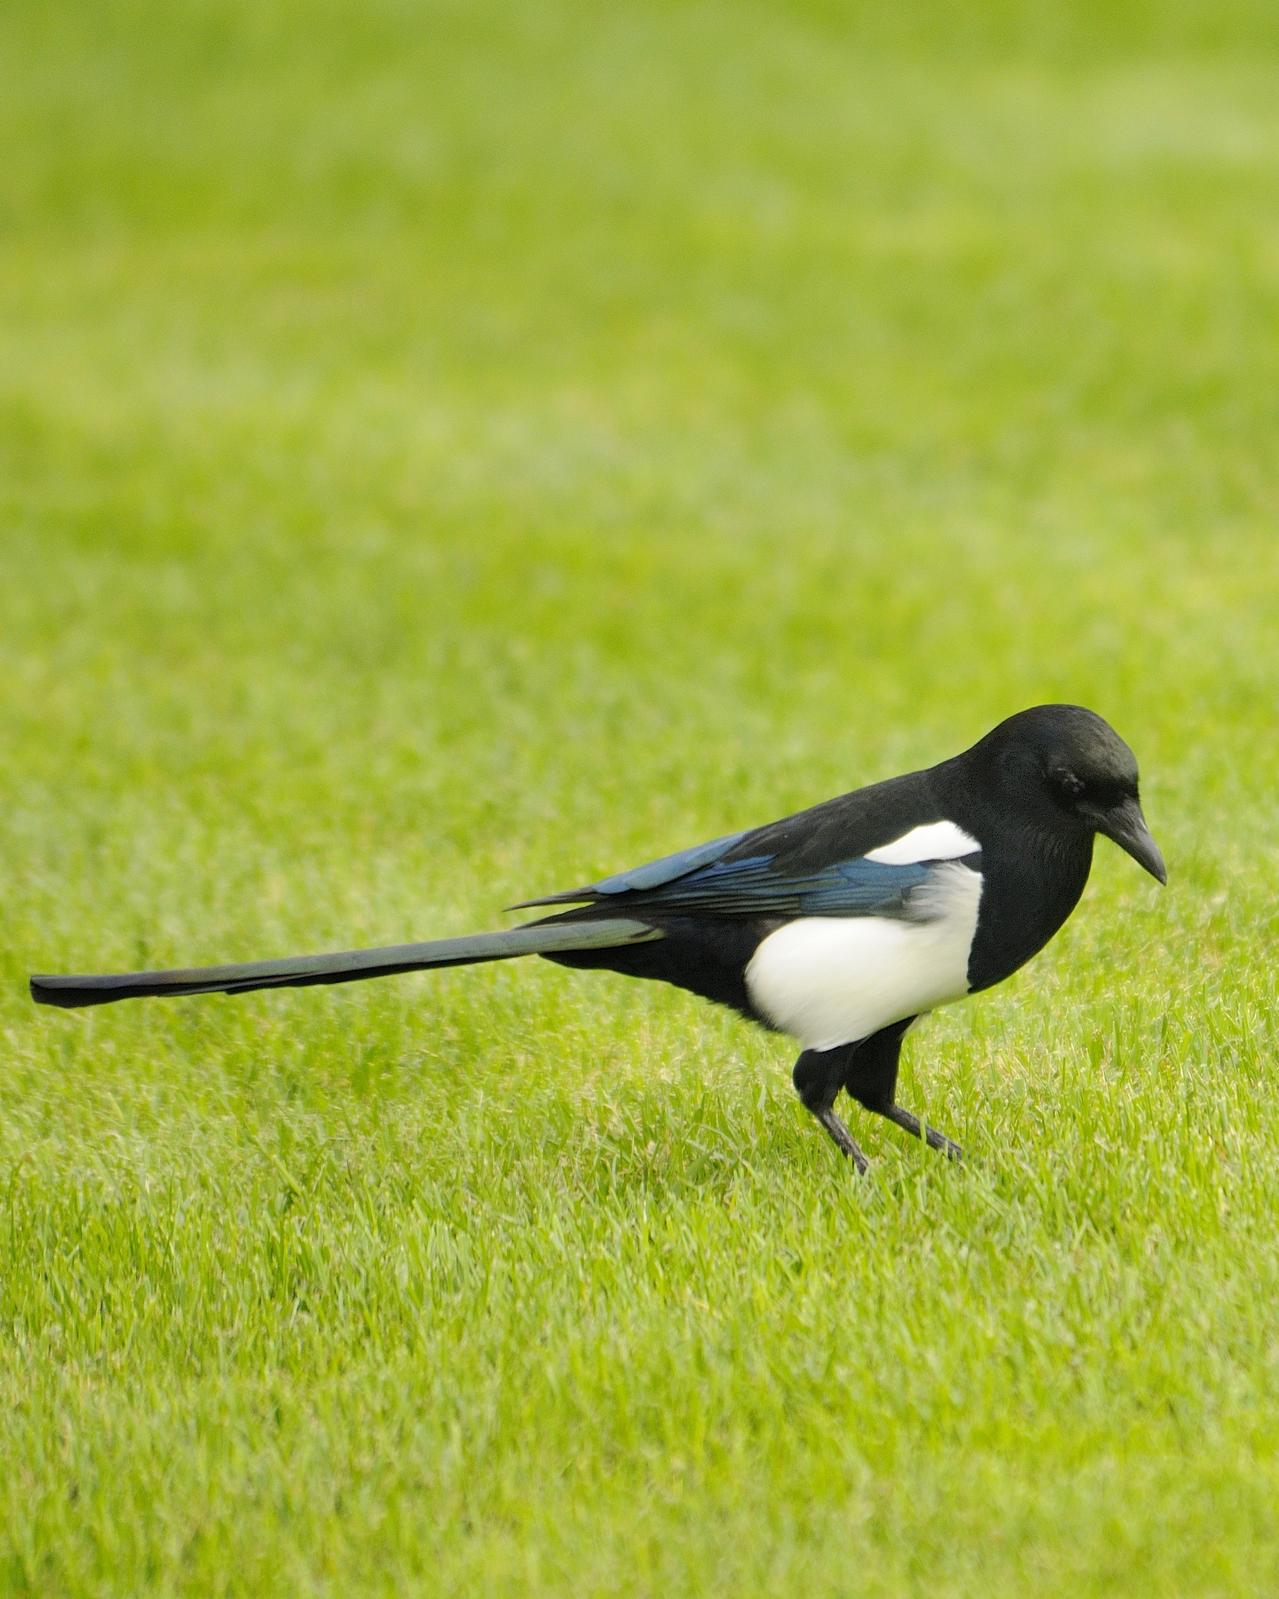 Eurasian Magpie Photo by Andres Rios